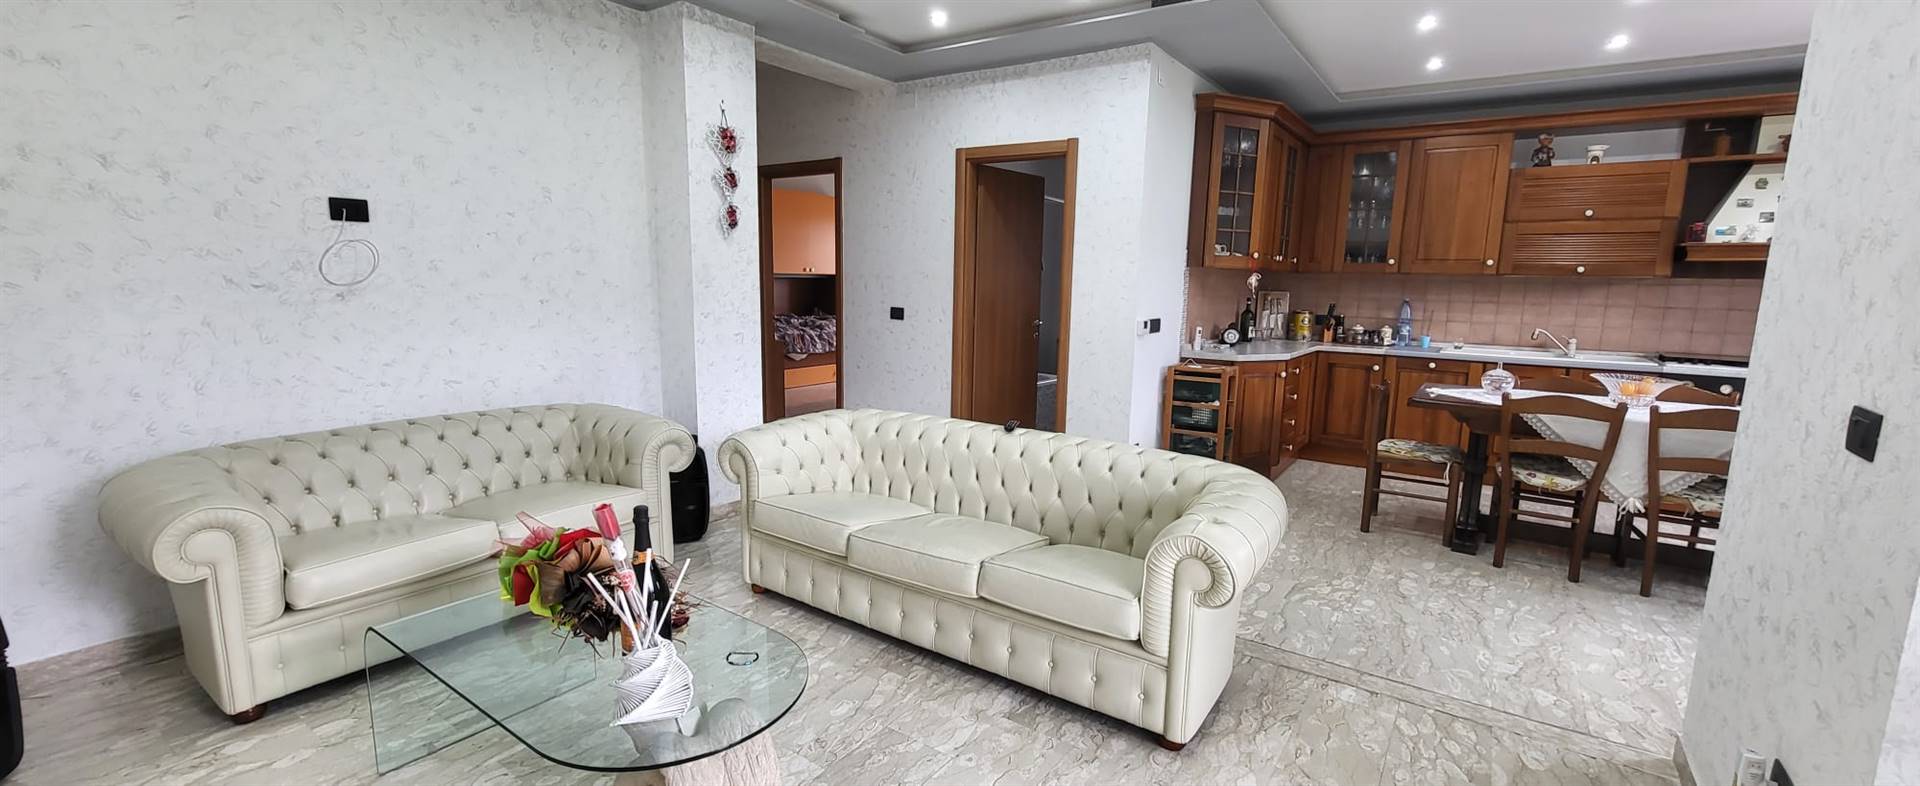 LUZZI, Apartment for sale of 114 Sq. mt., Excellent Condition, Energetic class: G, composed by: 3 Rooms, 2 Bedrooms, 1 Bathroom, Double Box, Balcony, 